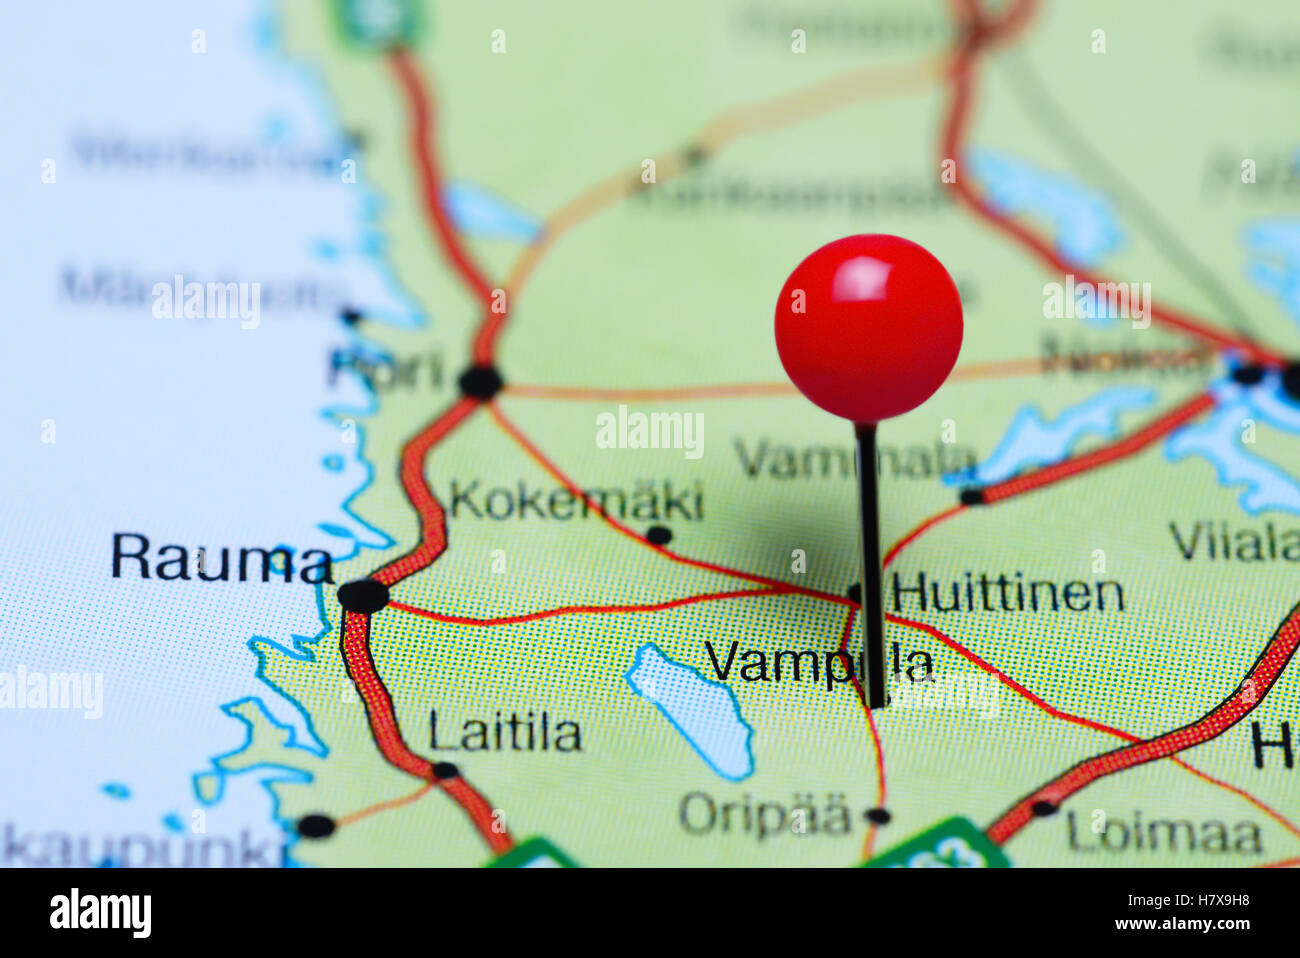 Vampula pinned on a map of Finland Stock Photo